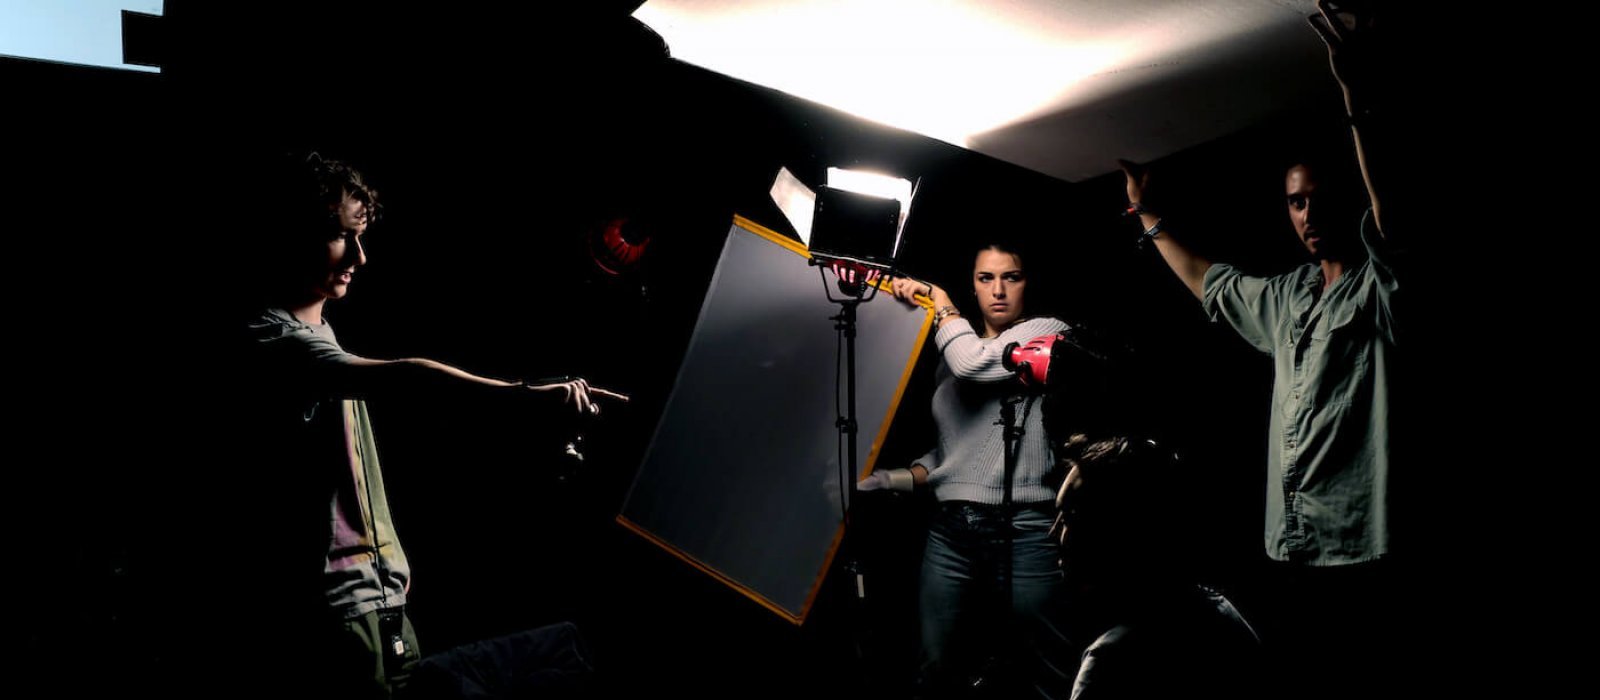 Falmouth Film students holding up reflectors in dramatically lit studio